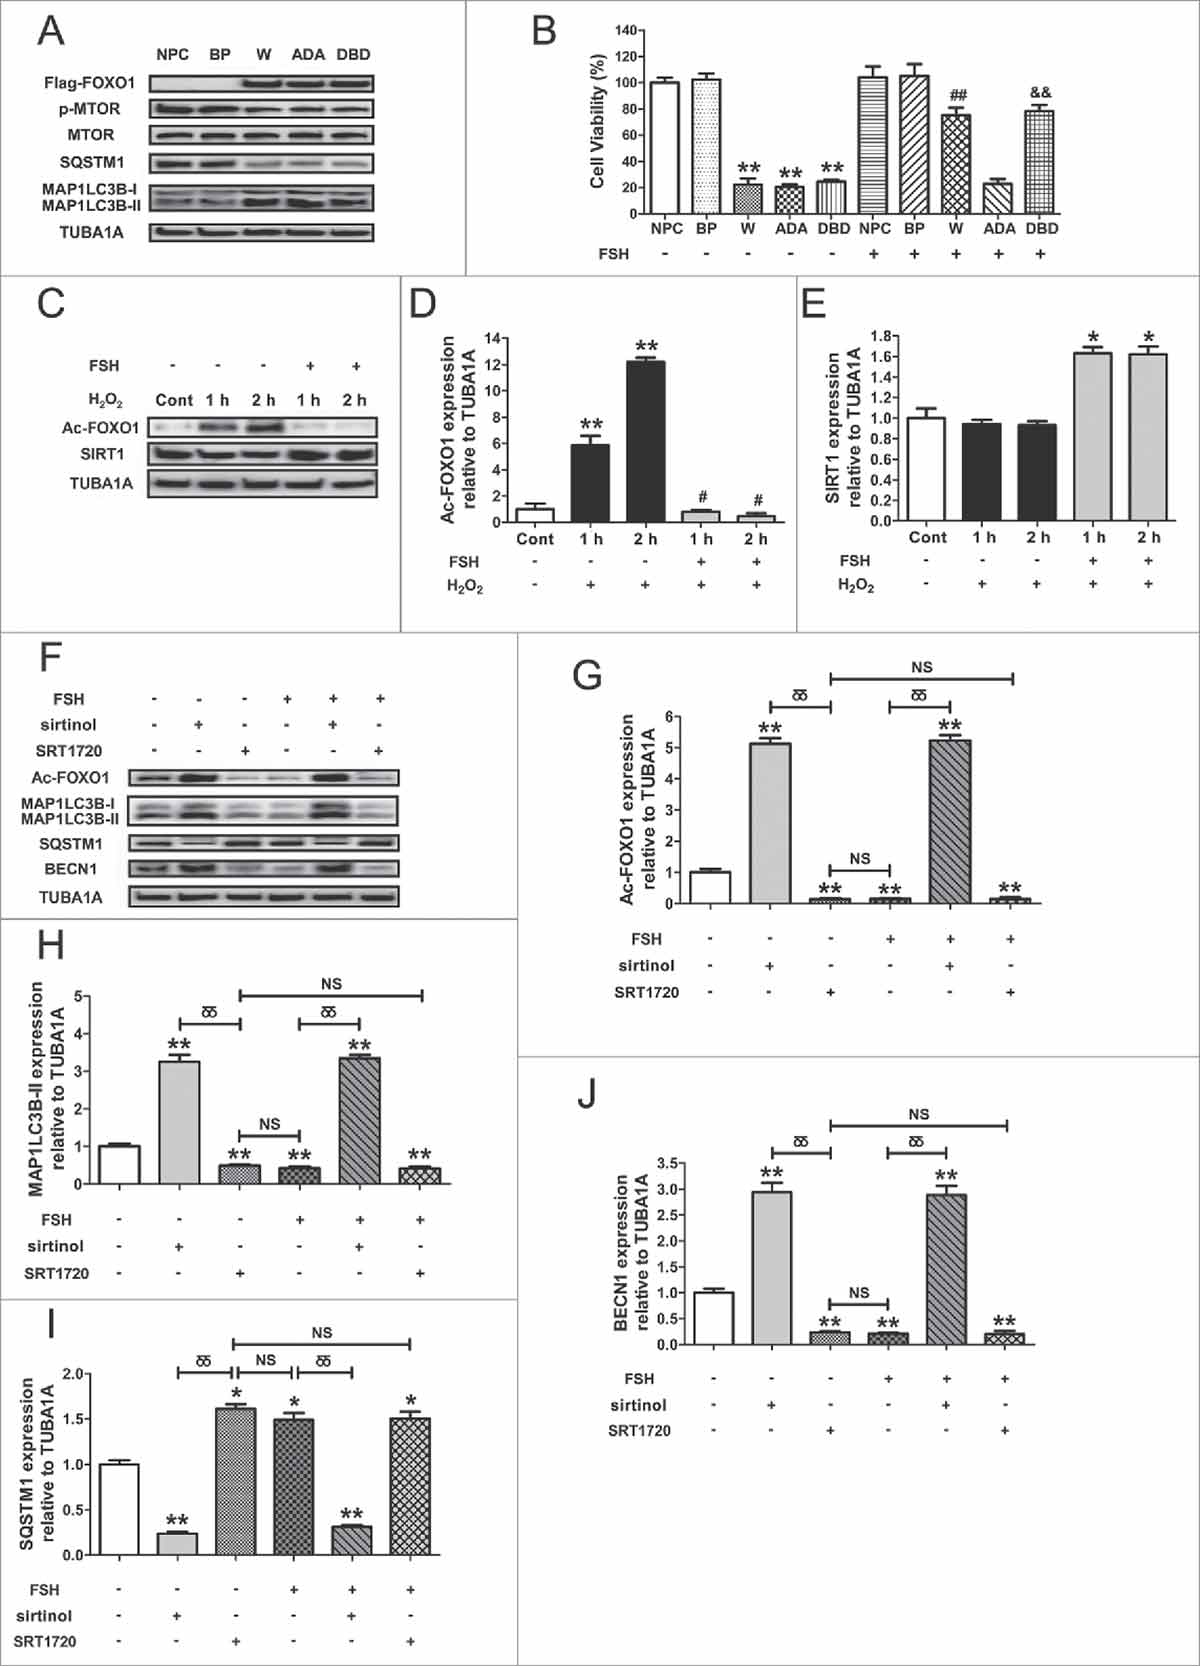 Figure 9. FSH inhibits oxidative stress-induced GC autophagy by regulating the acetylation status of FOXO1. (A) Different Flag-tagged FOXO1-expressing vectors, including FOXO1-WT (WT), FOXO1T24A,S253D,S316A (ADA), and FOXO1N208A,H212R (DBD), were transfected into GCs. 24 h later, cell lysates were collected to determine the protein levels of MAP1LC3B, SQSTM1 and p-MTOR using western blotting. TUBA1A served as the control for loading. (B) Cell viability was measured by CCK-8 assay in GCs transfected with FOXO1 expression plasmids upon FSH (7.5 IU/ml) treatment. Data represent mean ± S.E; n = 3. ** Represents P < 0.01 compared with the non-plasmid control. ## Represents P < 0.01 compared with the FOXO1-WT group. and& Represents P < 0.01 compared with the FOXO1N208A,H212R (DBD) group. NPC, non-plasmid control; BP, blank plasmid. (C) After incubation with 200 μM H2O2 for 1 h, GCs were washed in PBS, and then cultured in serum-free medium containing 7.5 IU/ml FSH for 1–2 h. The protein level of acetylated FOXO1 (Ac-FOXO1) and the deacetylase SIRT1 was determined by western blotting. (D and E) The relative expression of Ac-FOXO1 and SIRT1 were quantified using densitometric analysis. Data represent mean ± S.E; n = 3. **Represents P < 0.01 compared with the control group. # Represents P > 0.05 compared with the control group. (F) GCs transfected with FOXO1N208A,H212R plasmid for 24 h were incubated with 200 μM H2O2 for 1 h, rinsed in PBS, and cultured with serum-free medium in the presence or absence of 7.5 IU/ml FSH, 100 μM sirtinol or 100 μM SRT1720 as indicated. The expression of Ac-FOXO1, MAP1LC3B, SQSTM1 and BECN1 was then detected by western blotting. (G to J) Quantification of FOXO1 acetylation, MAP1LC3B-II accumulation, SQSTM1 degradation, and BECN1 expression. TUBA1A served as a loading control. Data represent mean ± S.E; n = 3. *Represents P < 0.05 (**Represents P<0.01) compared with the nontreatment control. δδ, P < 0.01; NS, not significant, P > 0.05.